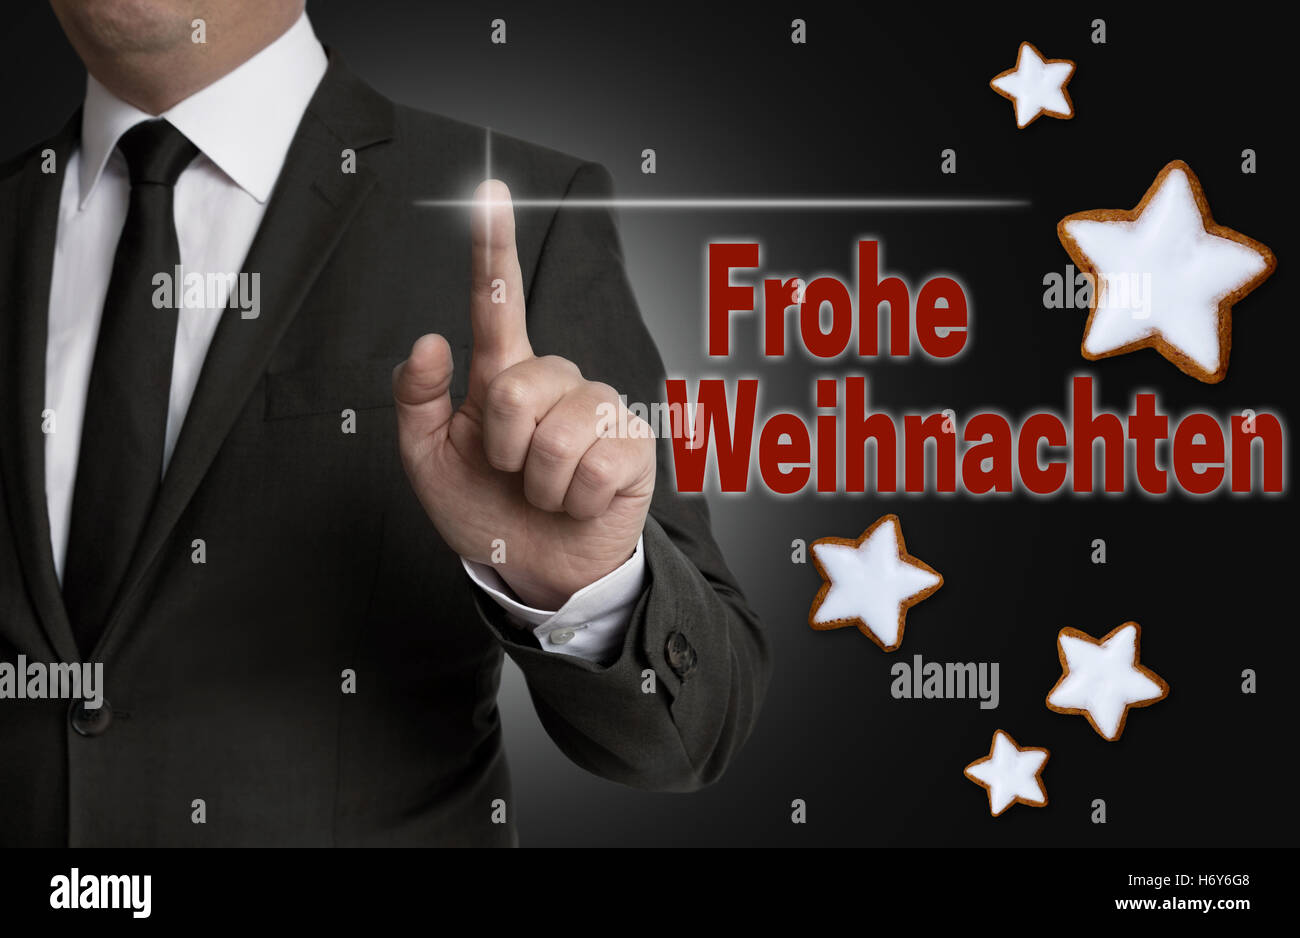 Frohe Weihnachten (in german Merry Christmas) touchscreen is operated by a businessman. Stock Photo